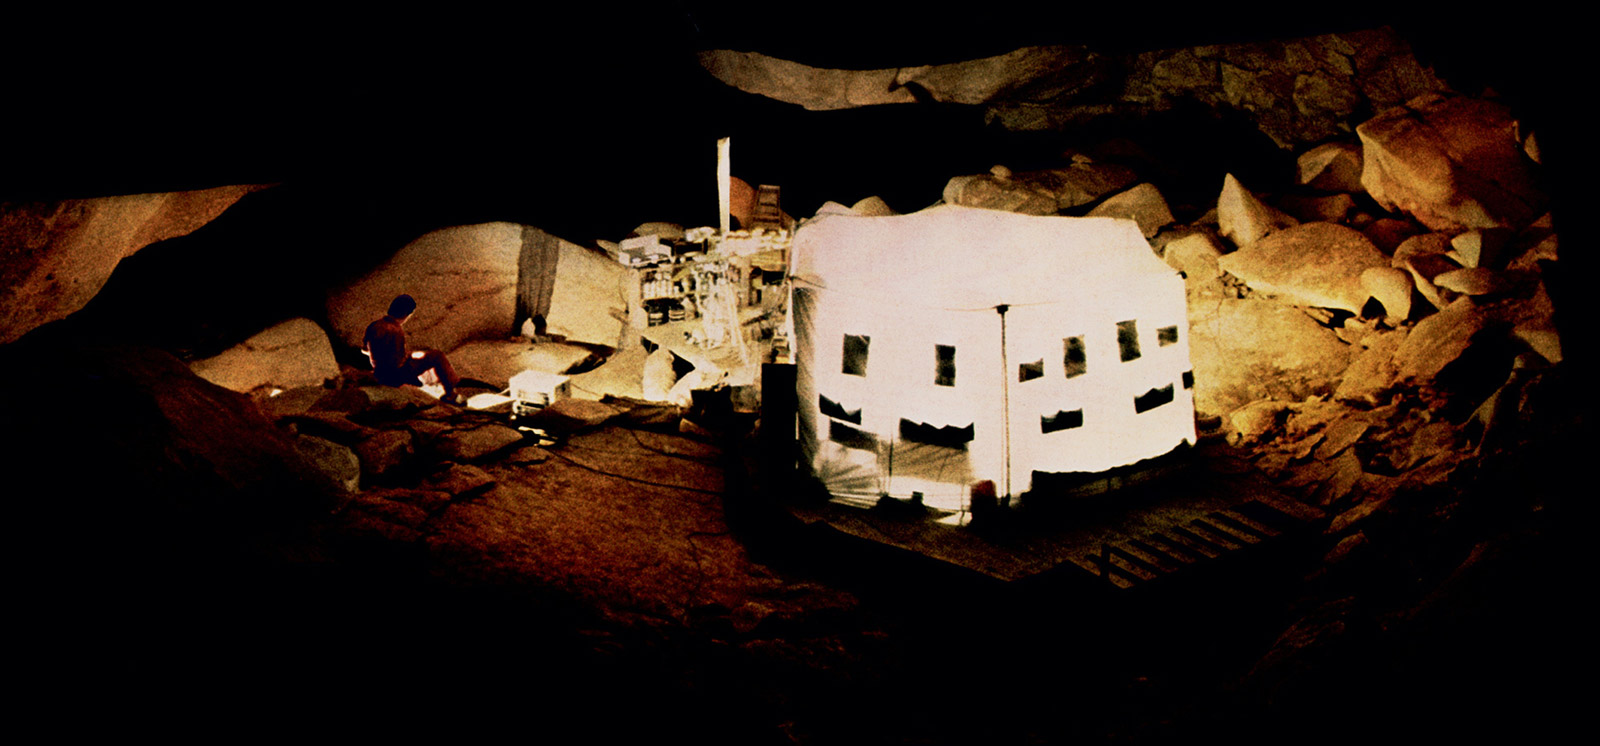 A nineteen seventy-two photograph of Michel Siffre’s tent in Midnight Cave, Texas, which glows with incandescent lights.